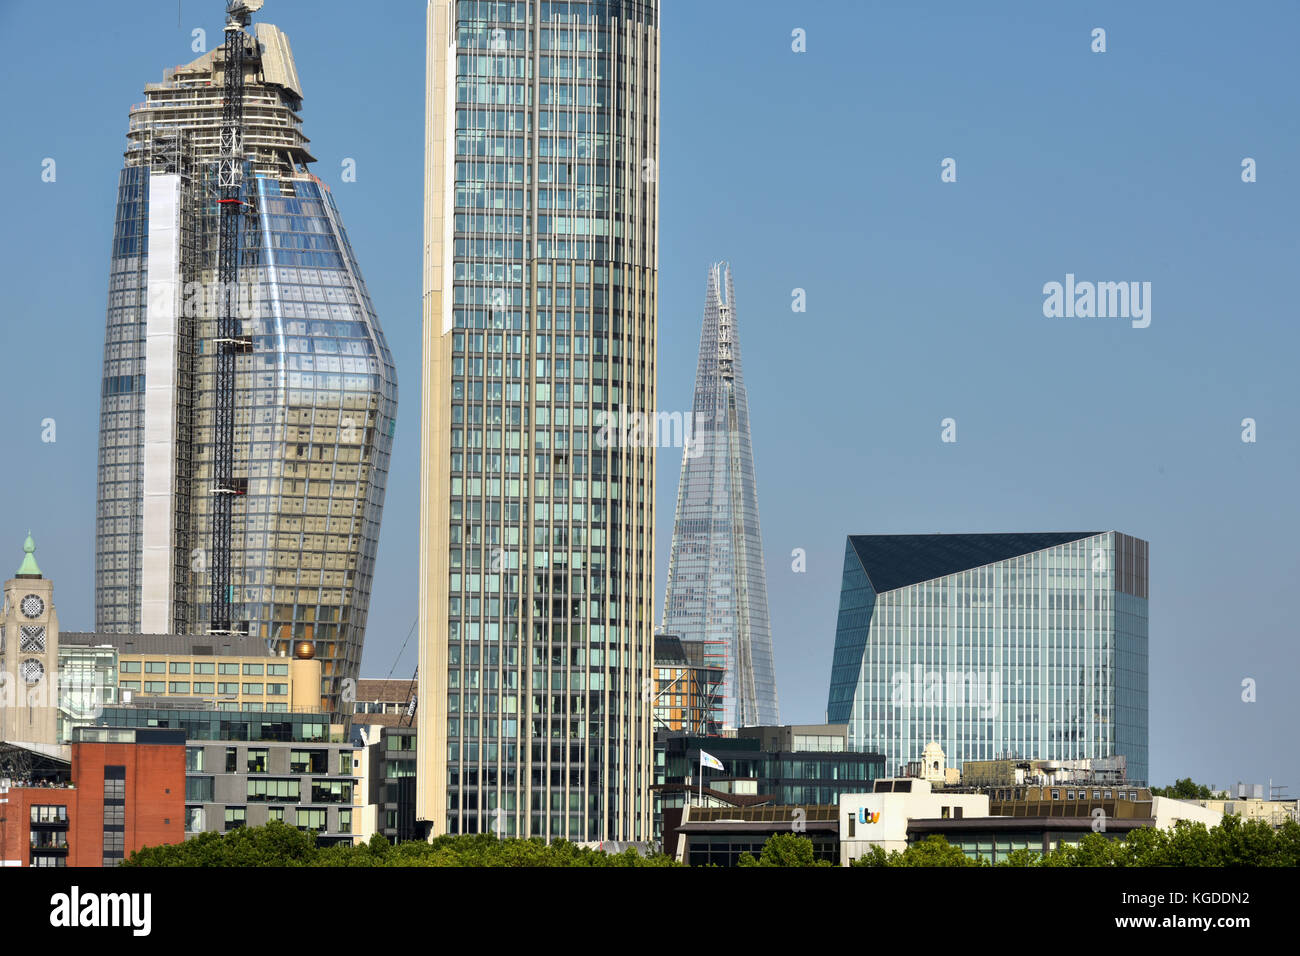 New developments along the South Bank of the River Thames in London are creating an alternative London skyline. Left to right, the diminutive OXO Towe Stock Photo